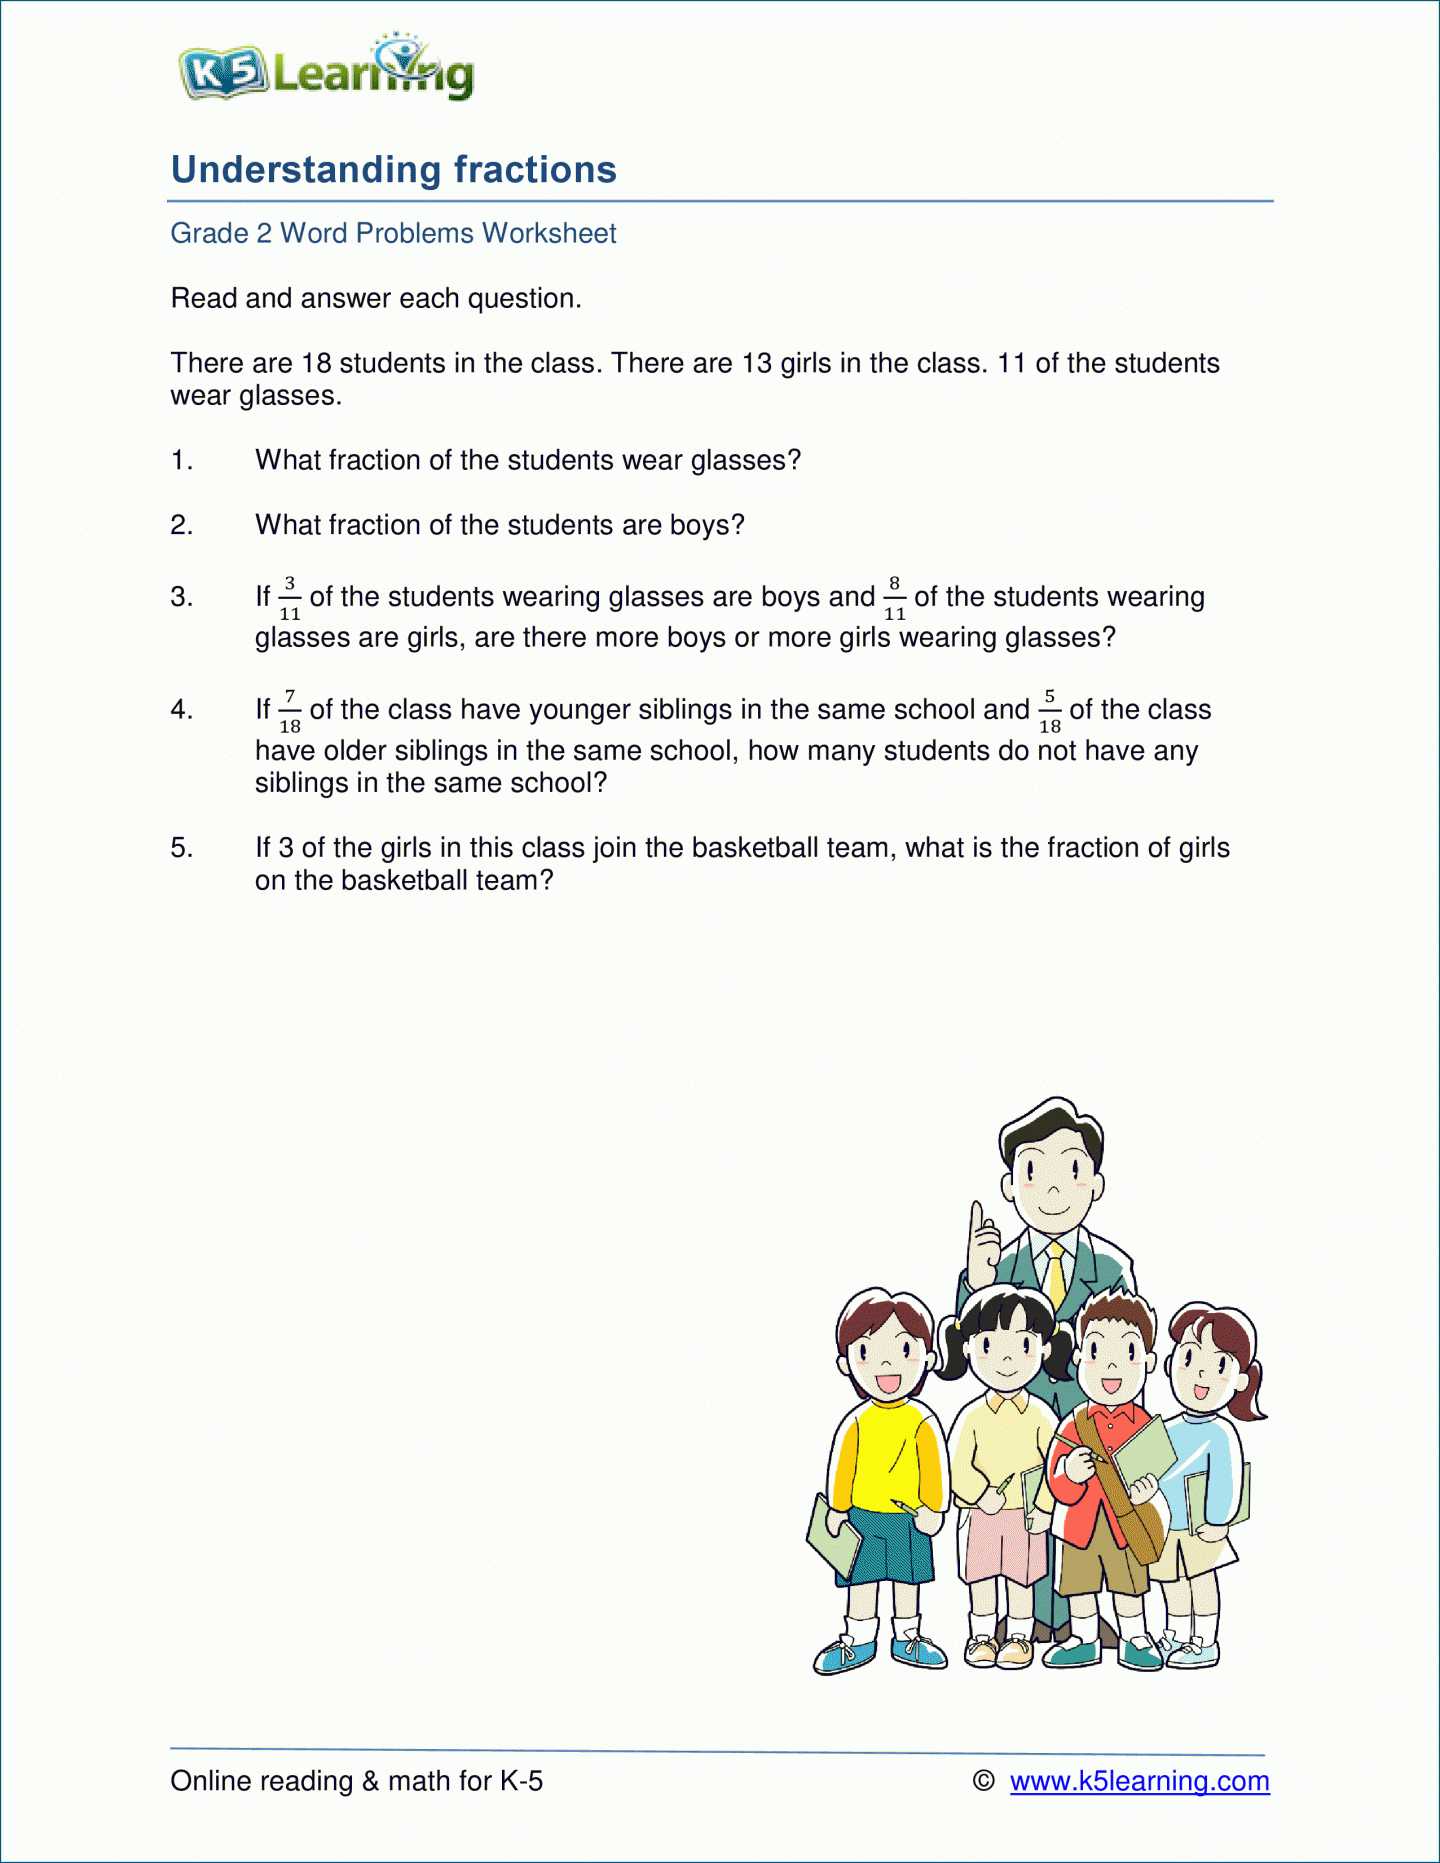 K5 Learning Worksheets Along with Fractions Grade Fraction Wordms Worksheet Fractionsm Worksheets for